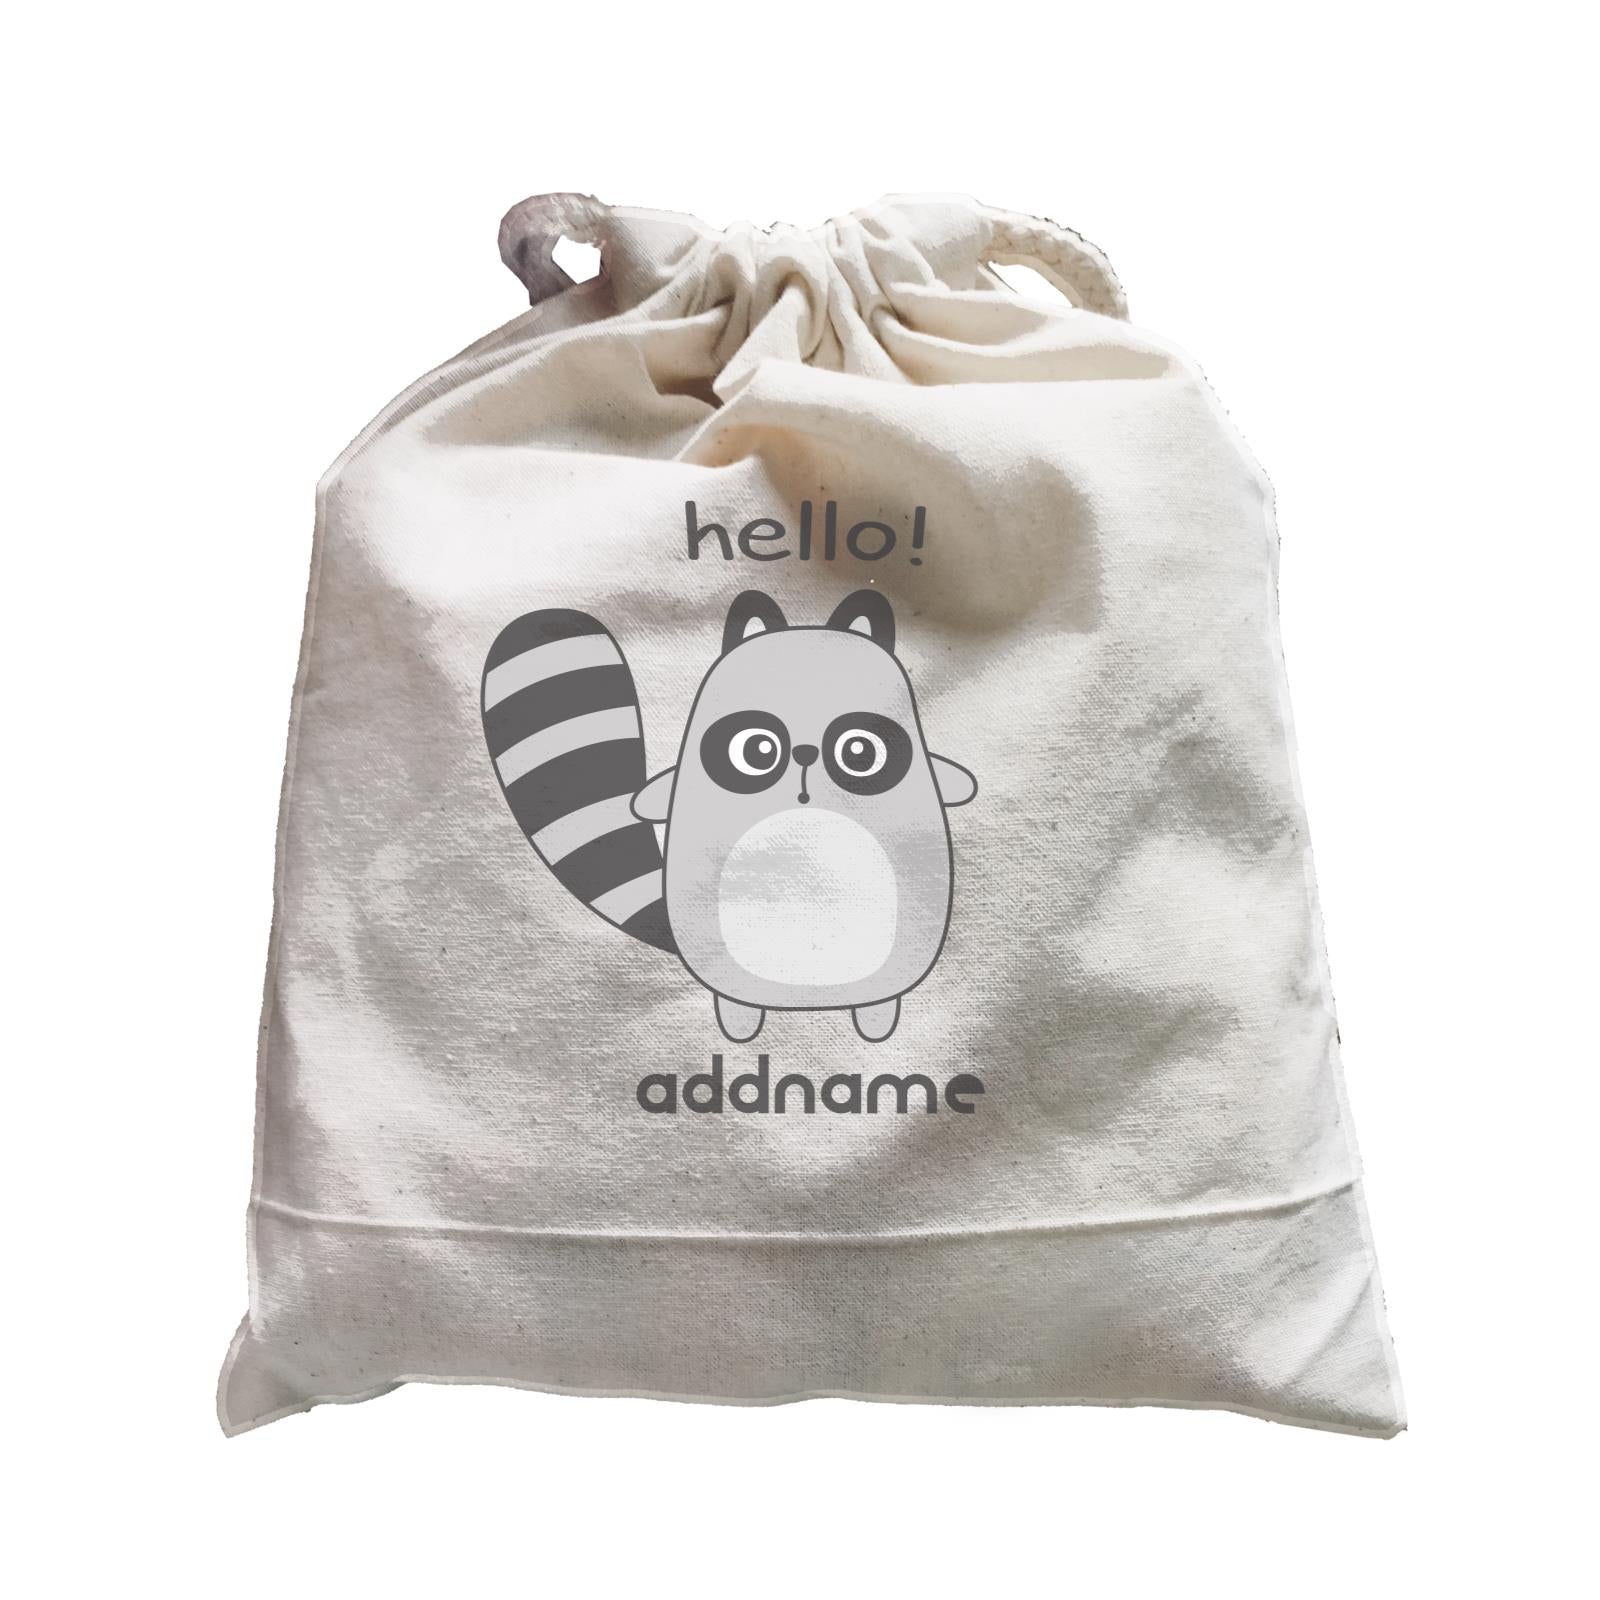 Cool Cute Animals Racoon Hello Addname Satchel